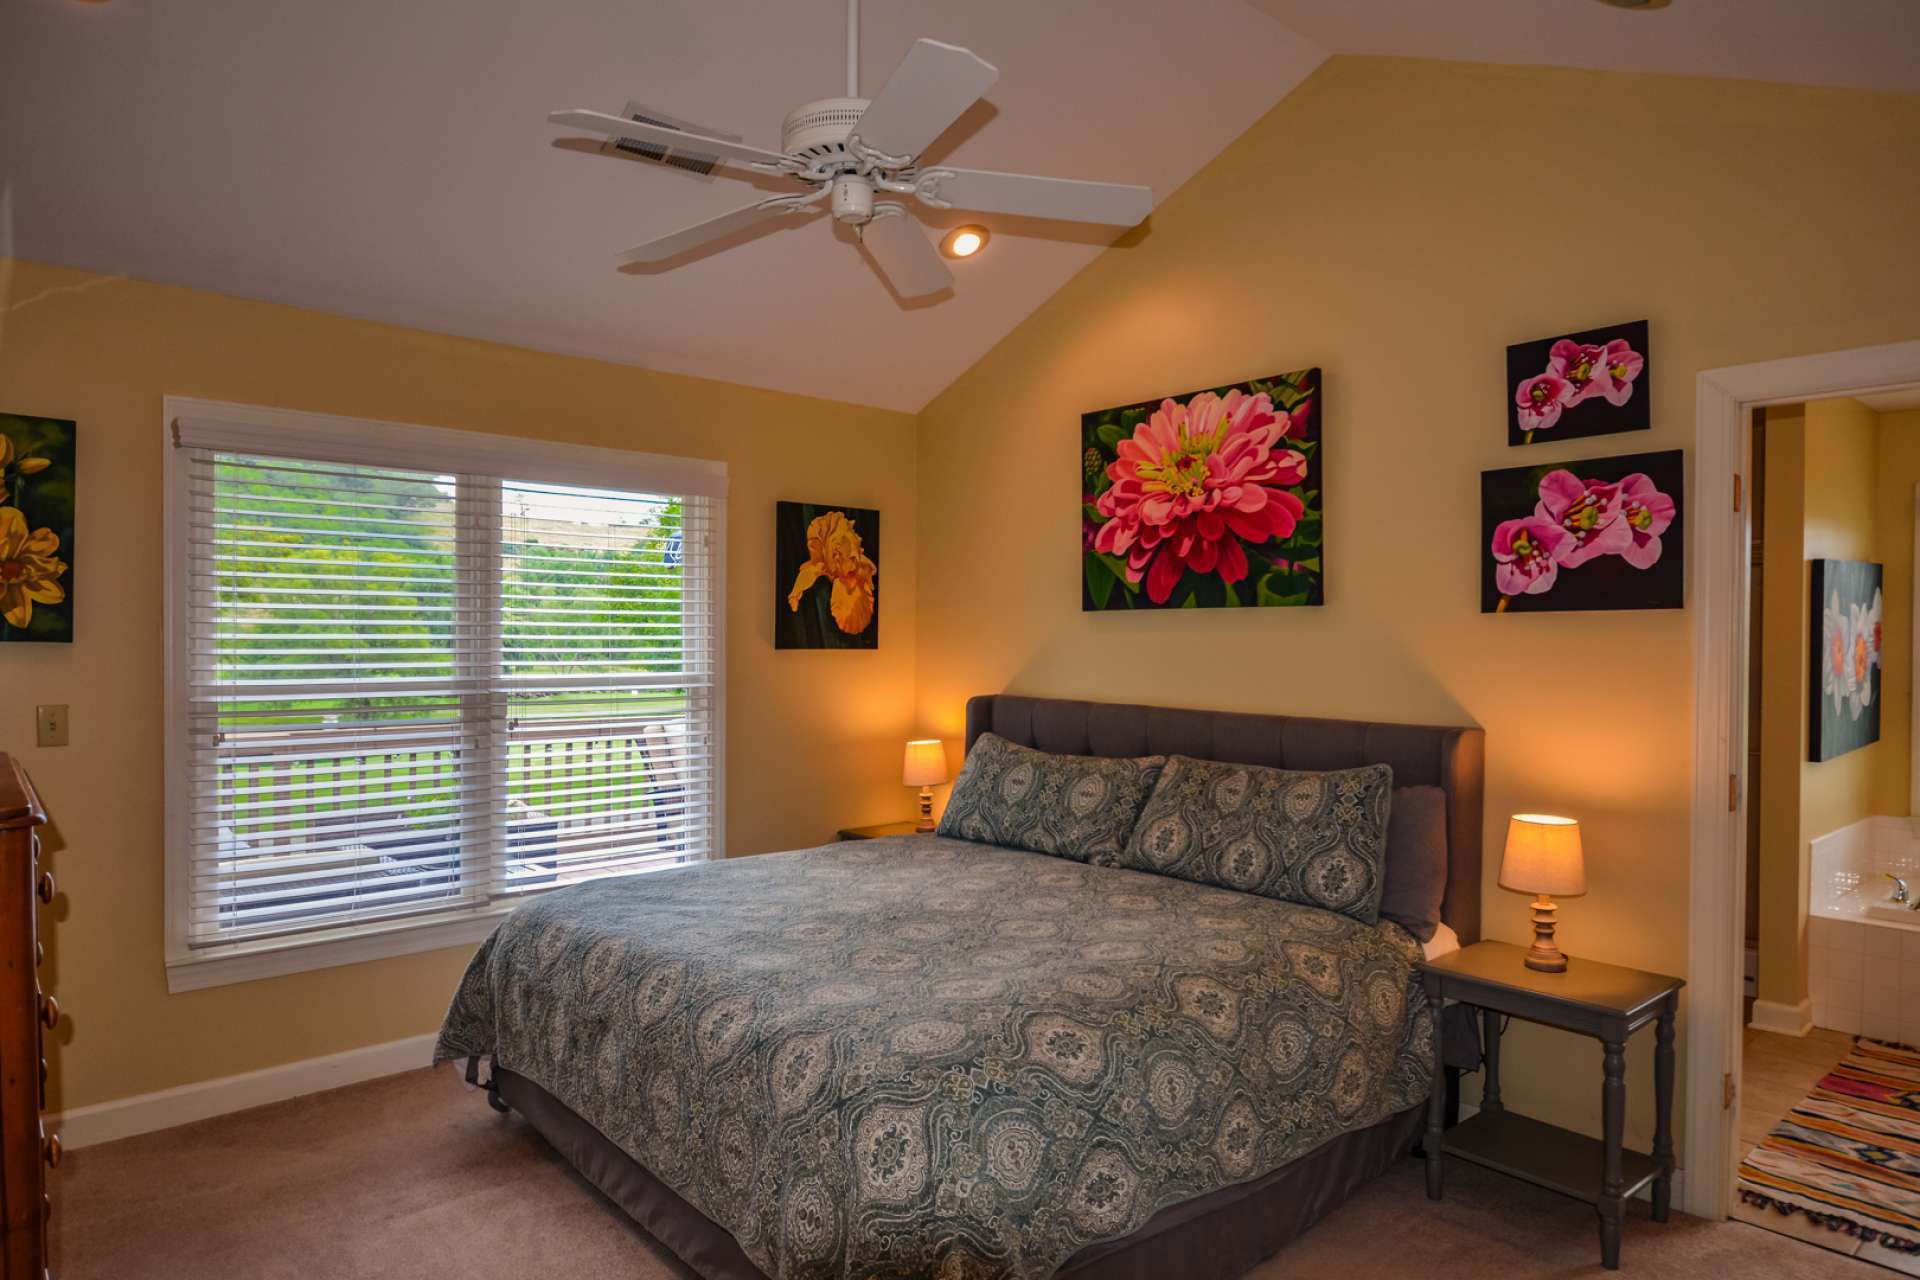 The vaulted master suite is bright and cheery and features a private bath with whirlpool tub, separate shower and walk-in closet.